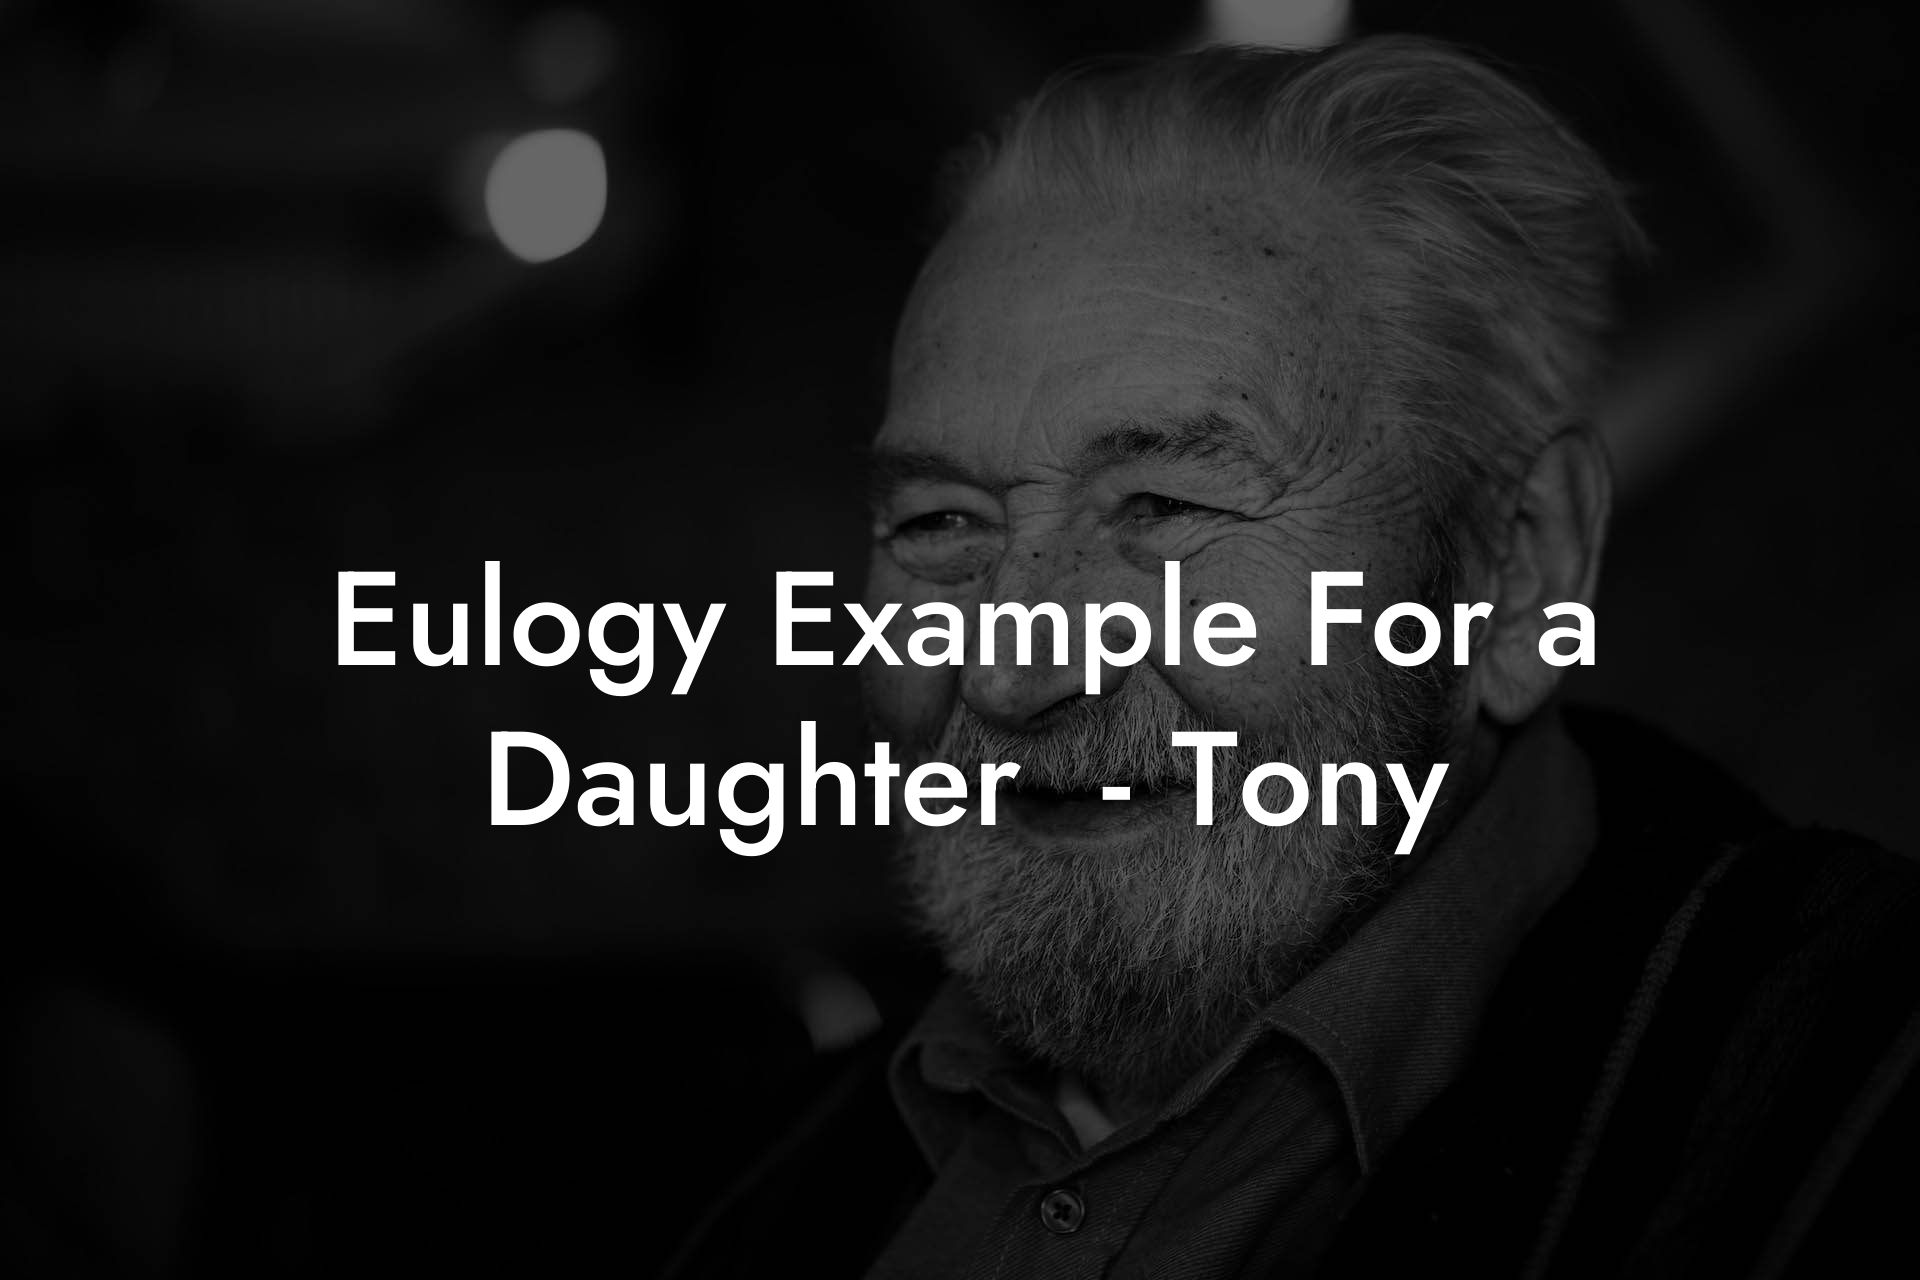 Eulogy Example For a Daughter  - Tony